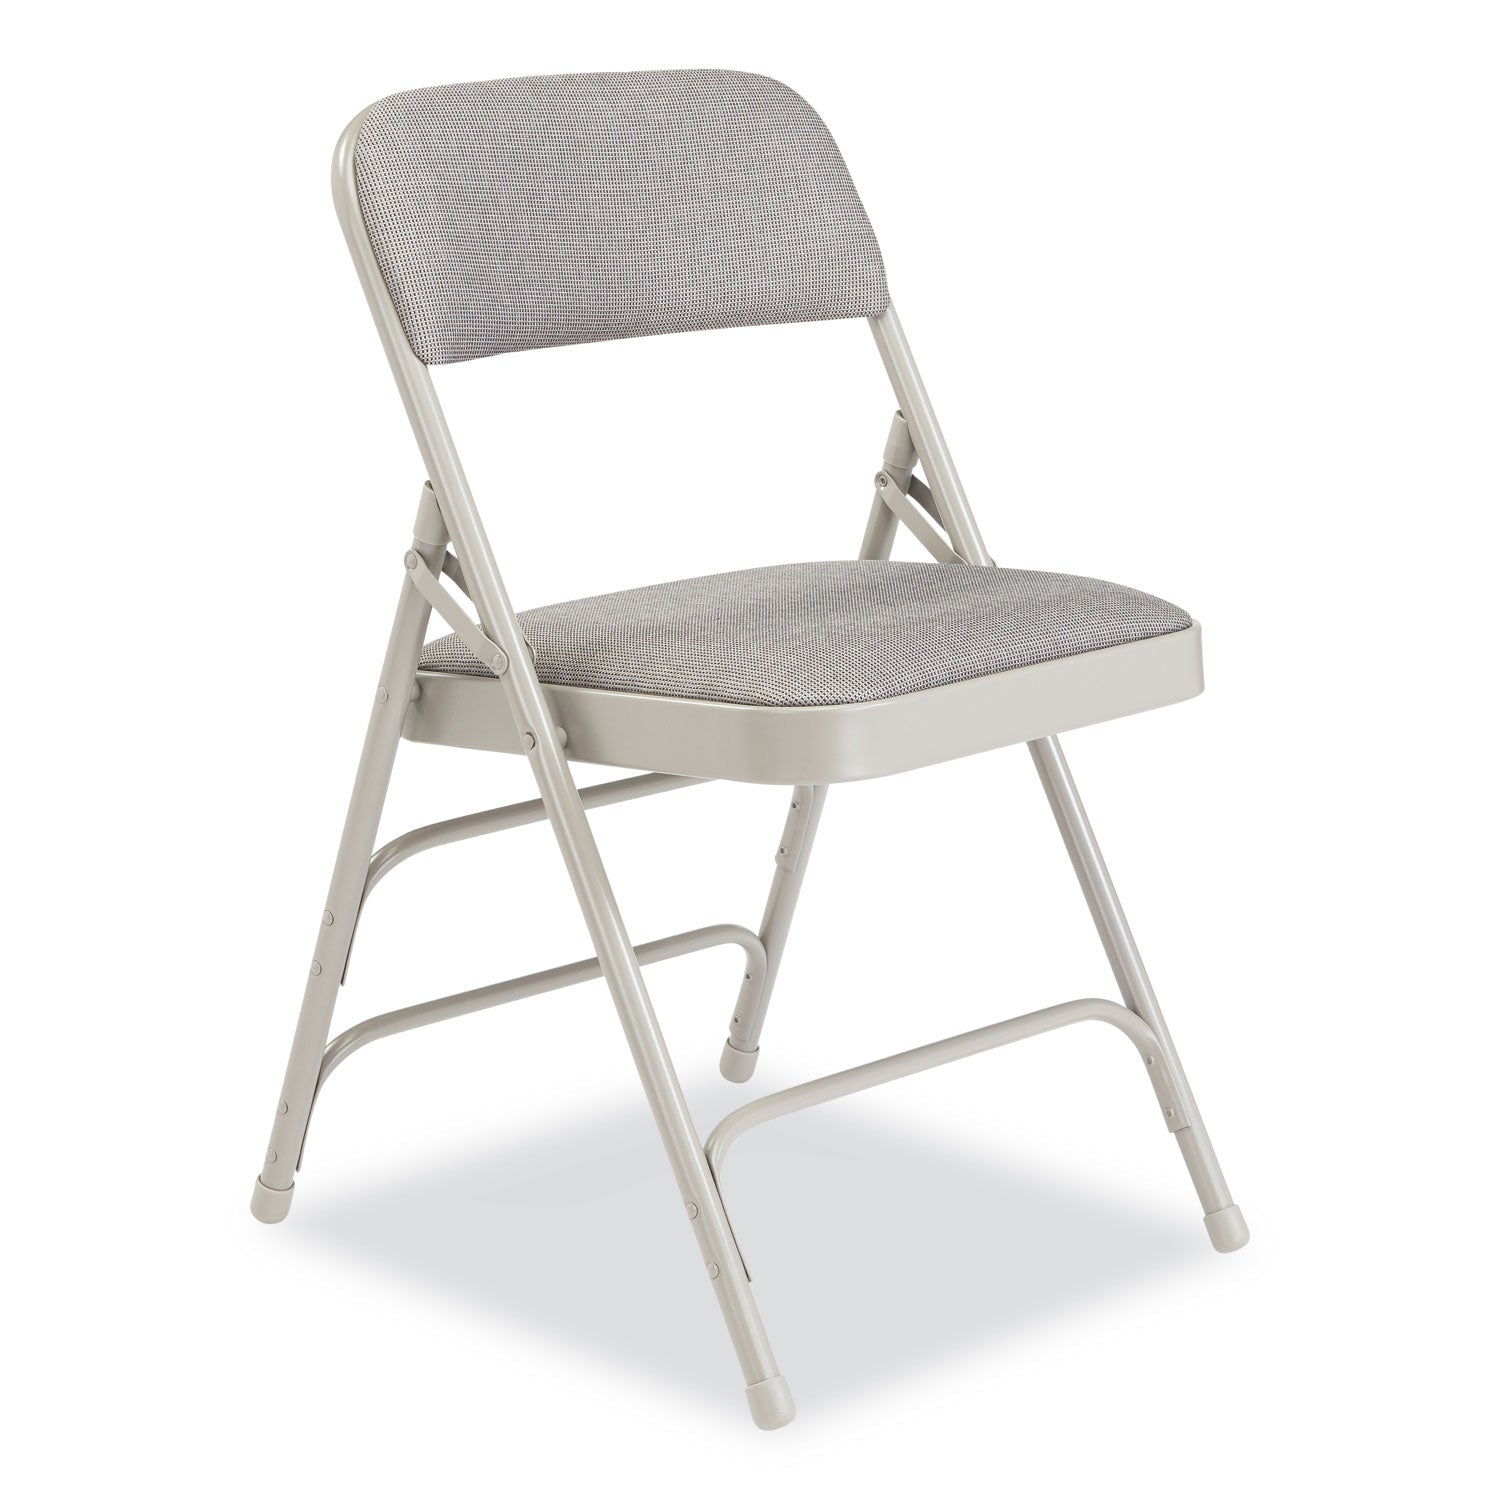 2300-series-fabric-triple-brace-double-hinge-premium-folding-chair-supports-500-lb-greystone-4-ct-ships-in-1-3-bus-days_nps2302 - 2